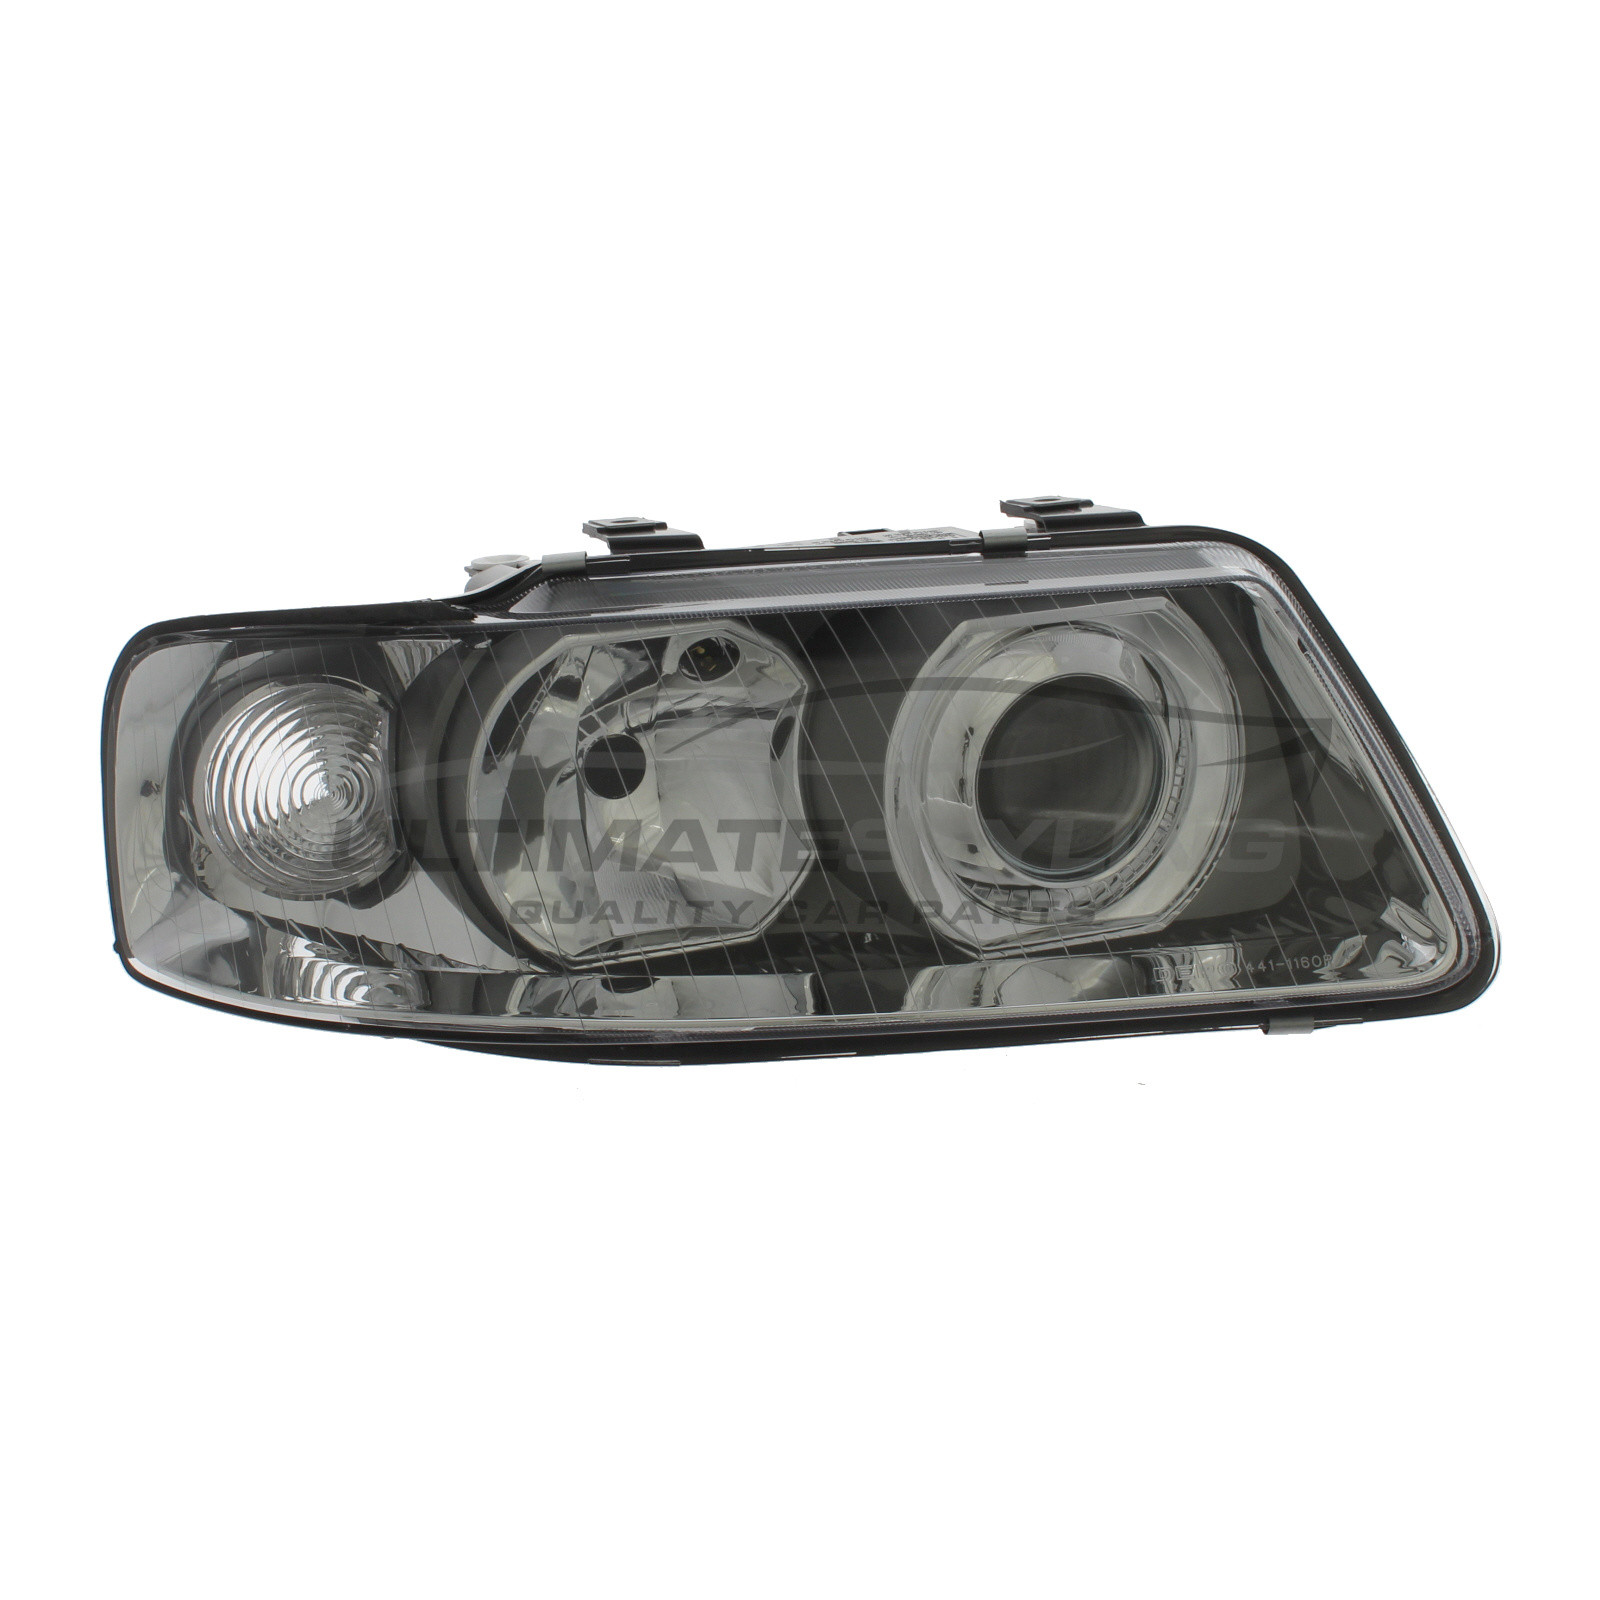 Audi A3 2000-2003 Halogen, Electric Without Motor, Chrome Headlight / Headlamp Including Clear Indicator Drivers Side (RH)